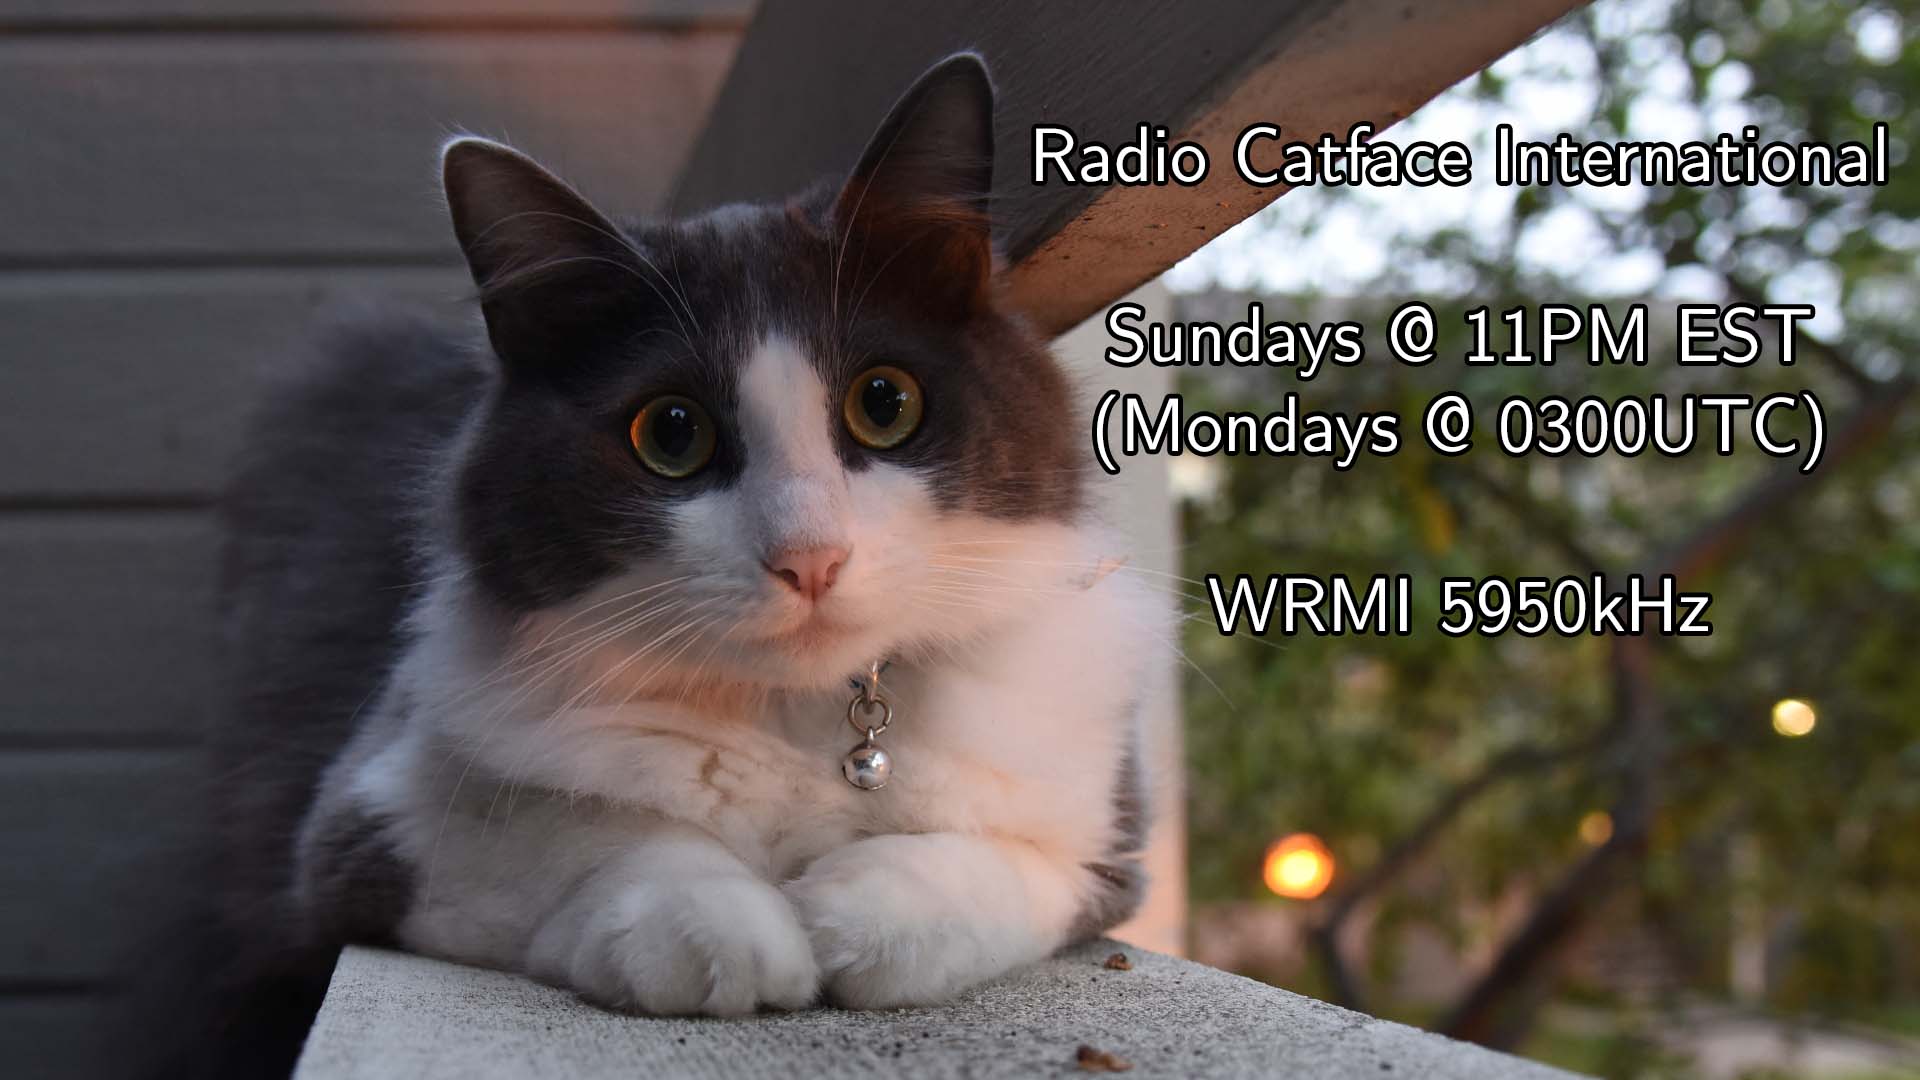 A grey and white cat is looking at the camera.  The text reads: Radio Catface International / Sundays @ 11PM EST / (Mondays @ 0300UTC) / WRMI 5950kHz